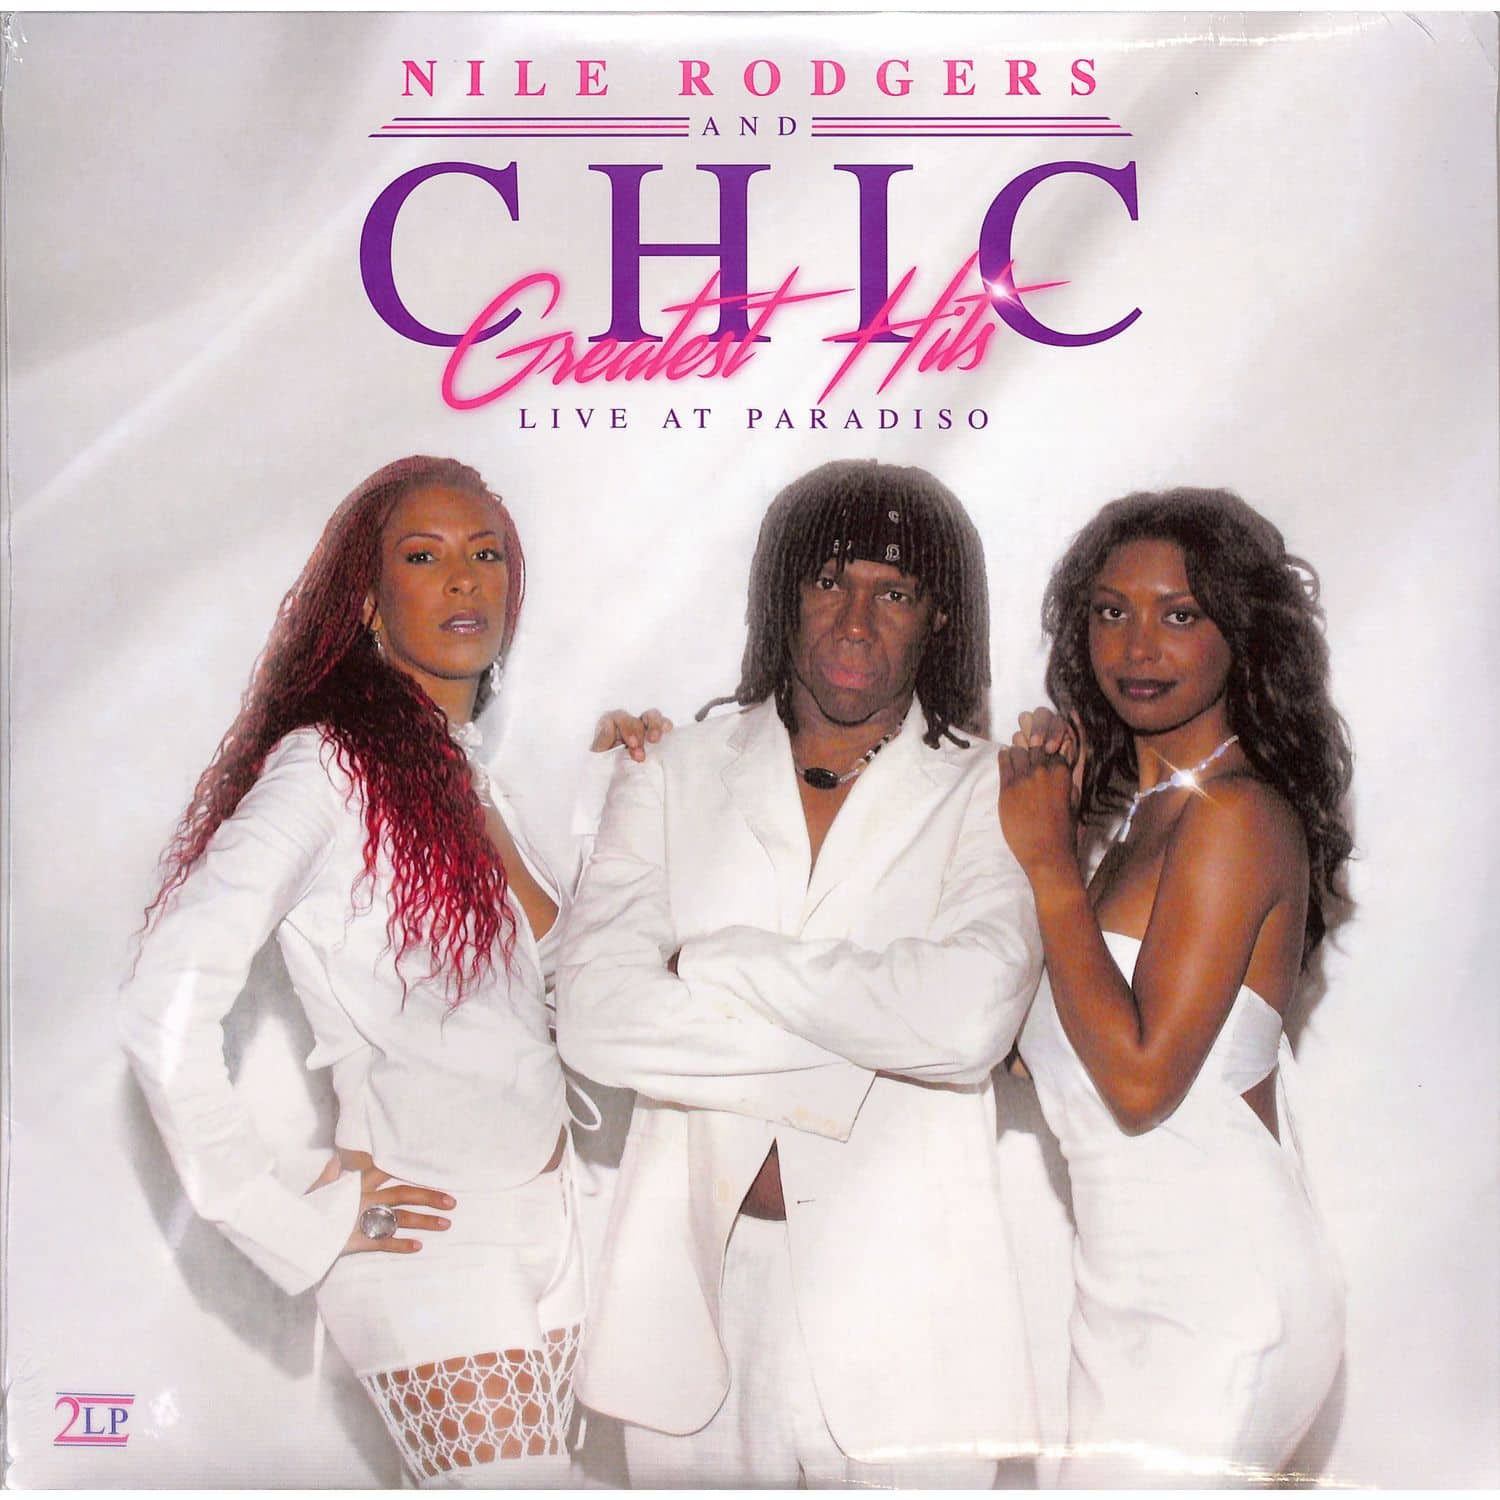 Nile Rodgers & Chic - GREATEST HITS - LIVE AT PARADISO 